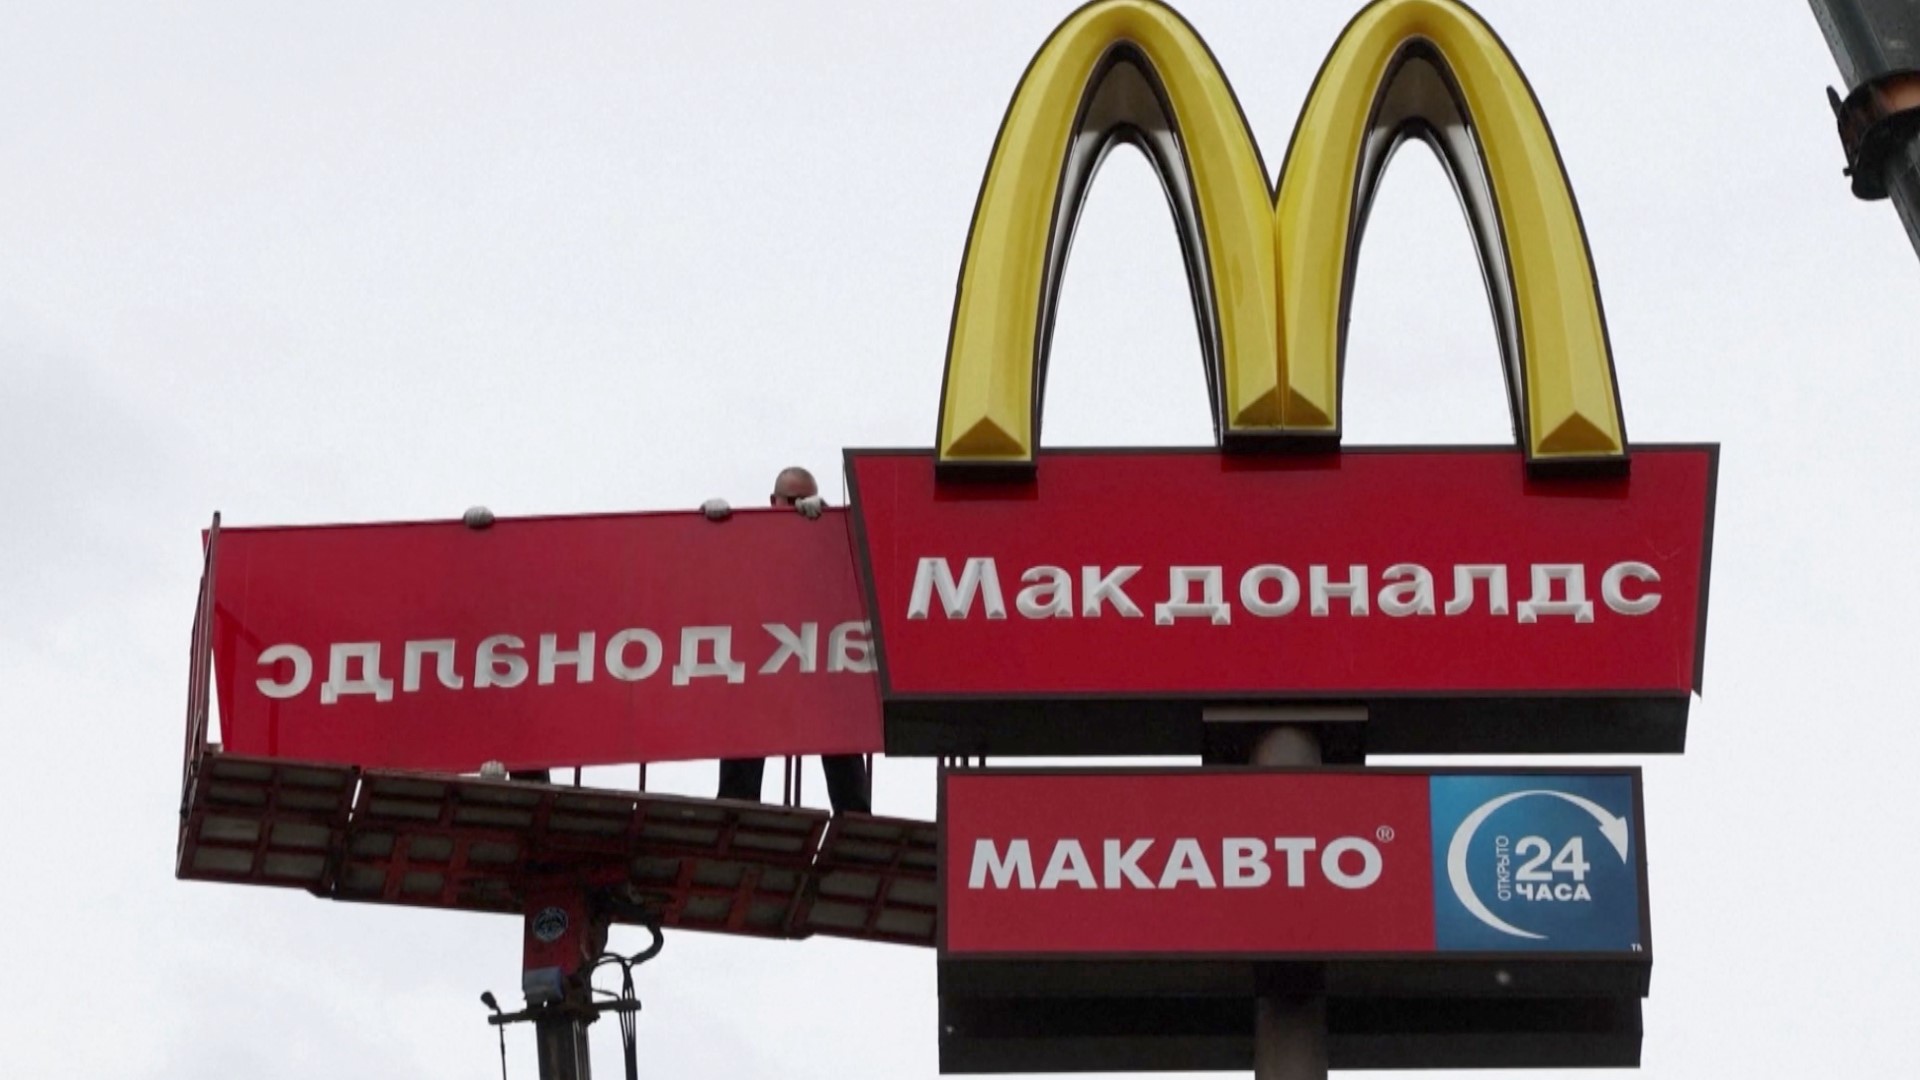 Russia says goodbye to McDonald's iconic golden arches and reveals a new replacing logo. Veuer's Maria Mercedes Galuppo has the story.